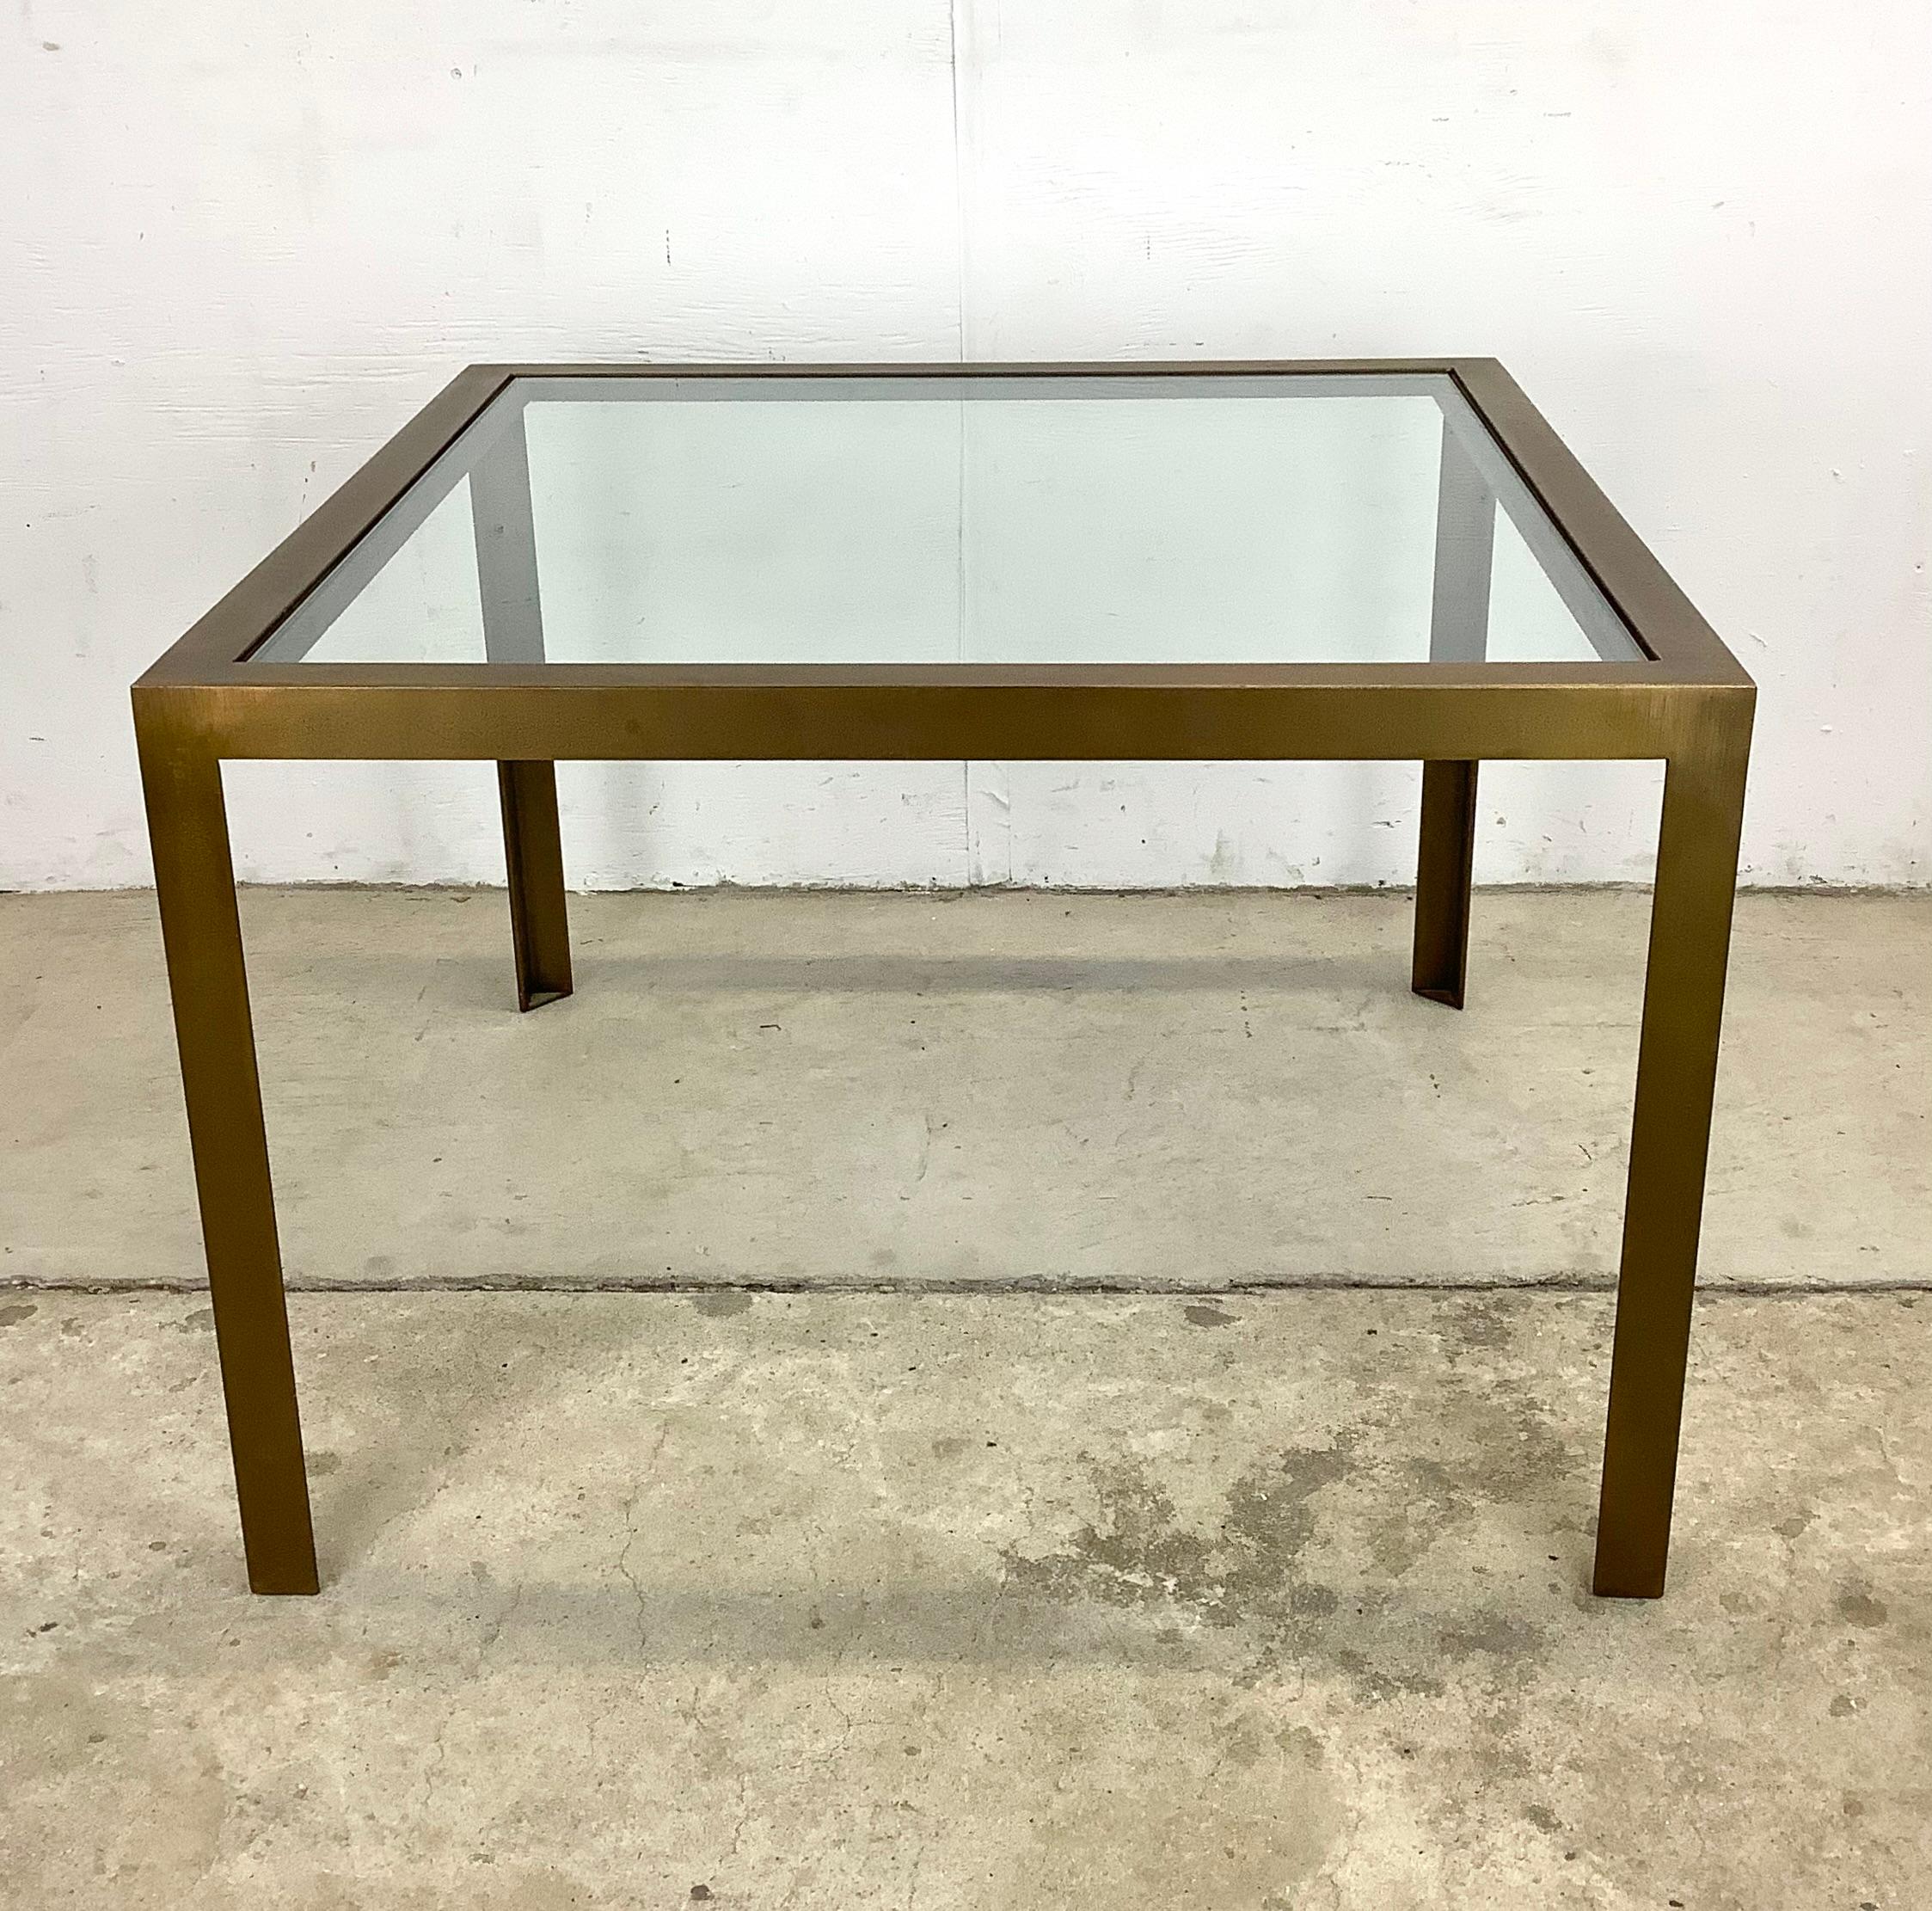 This vintage modern bronze finish glass top square coffee table makes a simple yet striking statement piece to any seating arrangement. Clean modern lines, mid-century style, and substantial manufacture make this the perfect mcm centerpiece for any